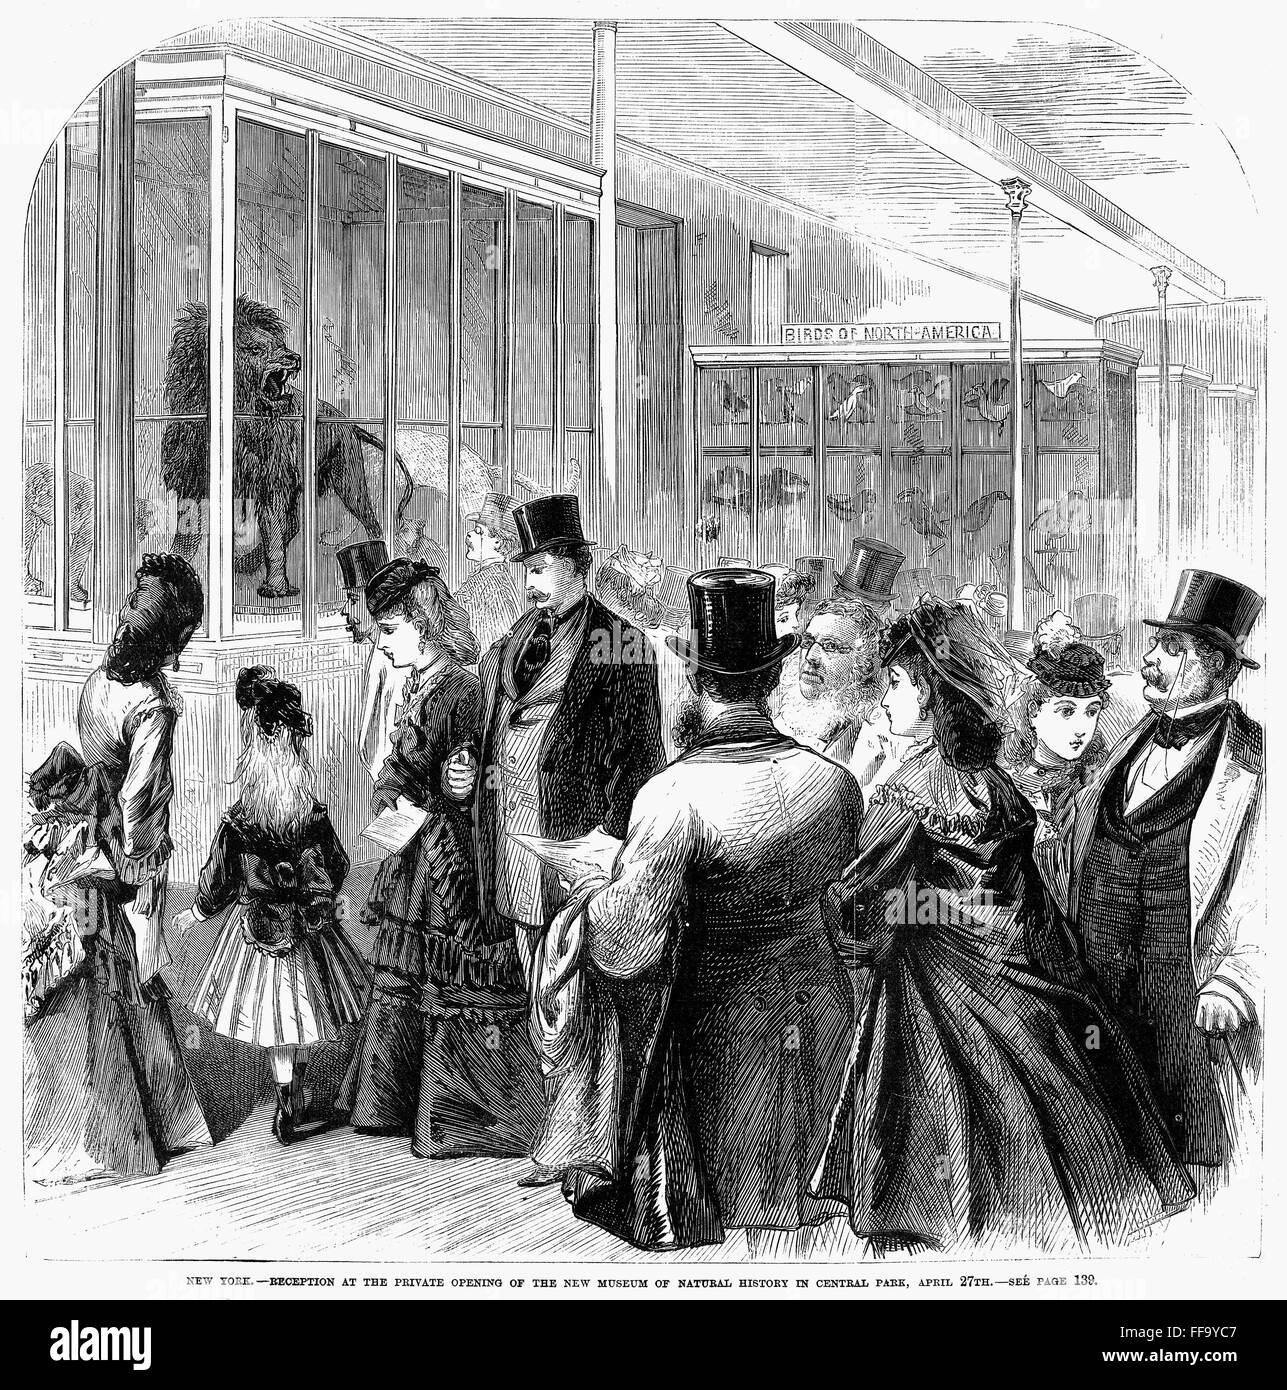 MUSEUM OF NATURAL HISTORY. /nThe opening of the American Museum of Natural History in its temporary Central Park quarters in 1871. Contemporary wood engraving. Stock Photo